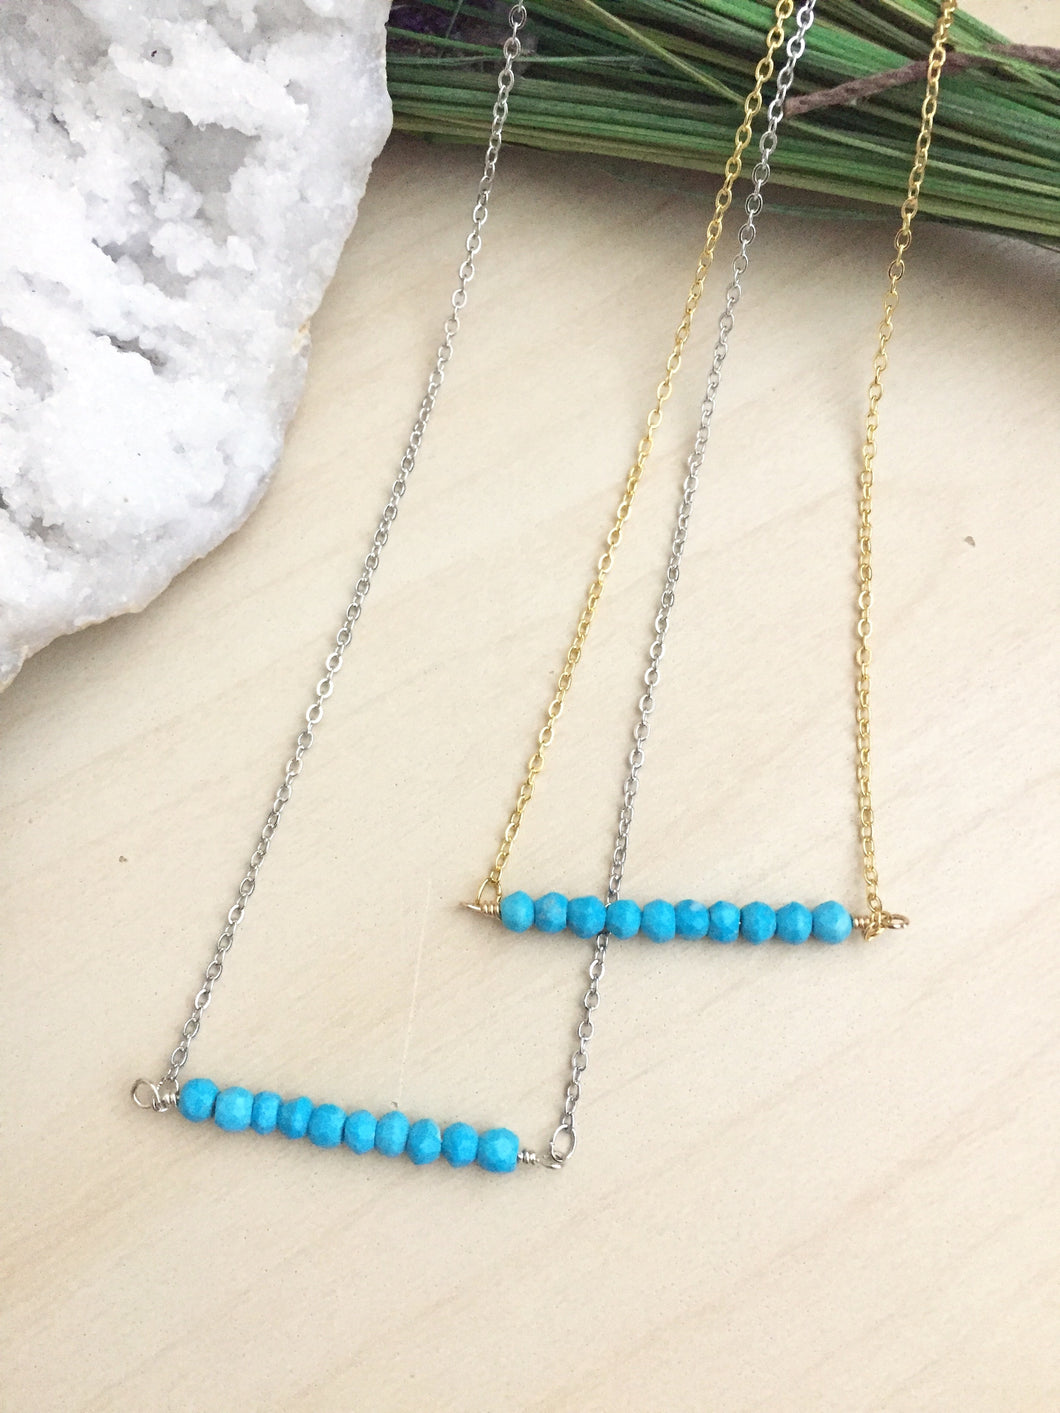 Turquoise Bar Necklace - 1 inch bar - Layering Necklace